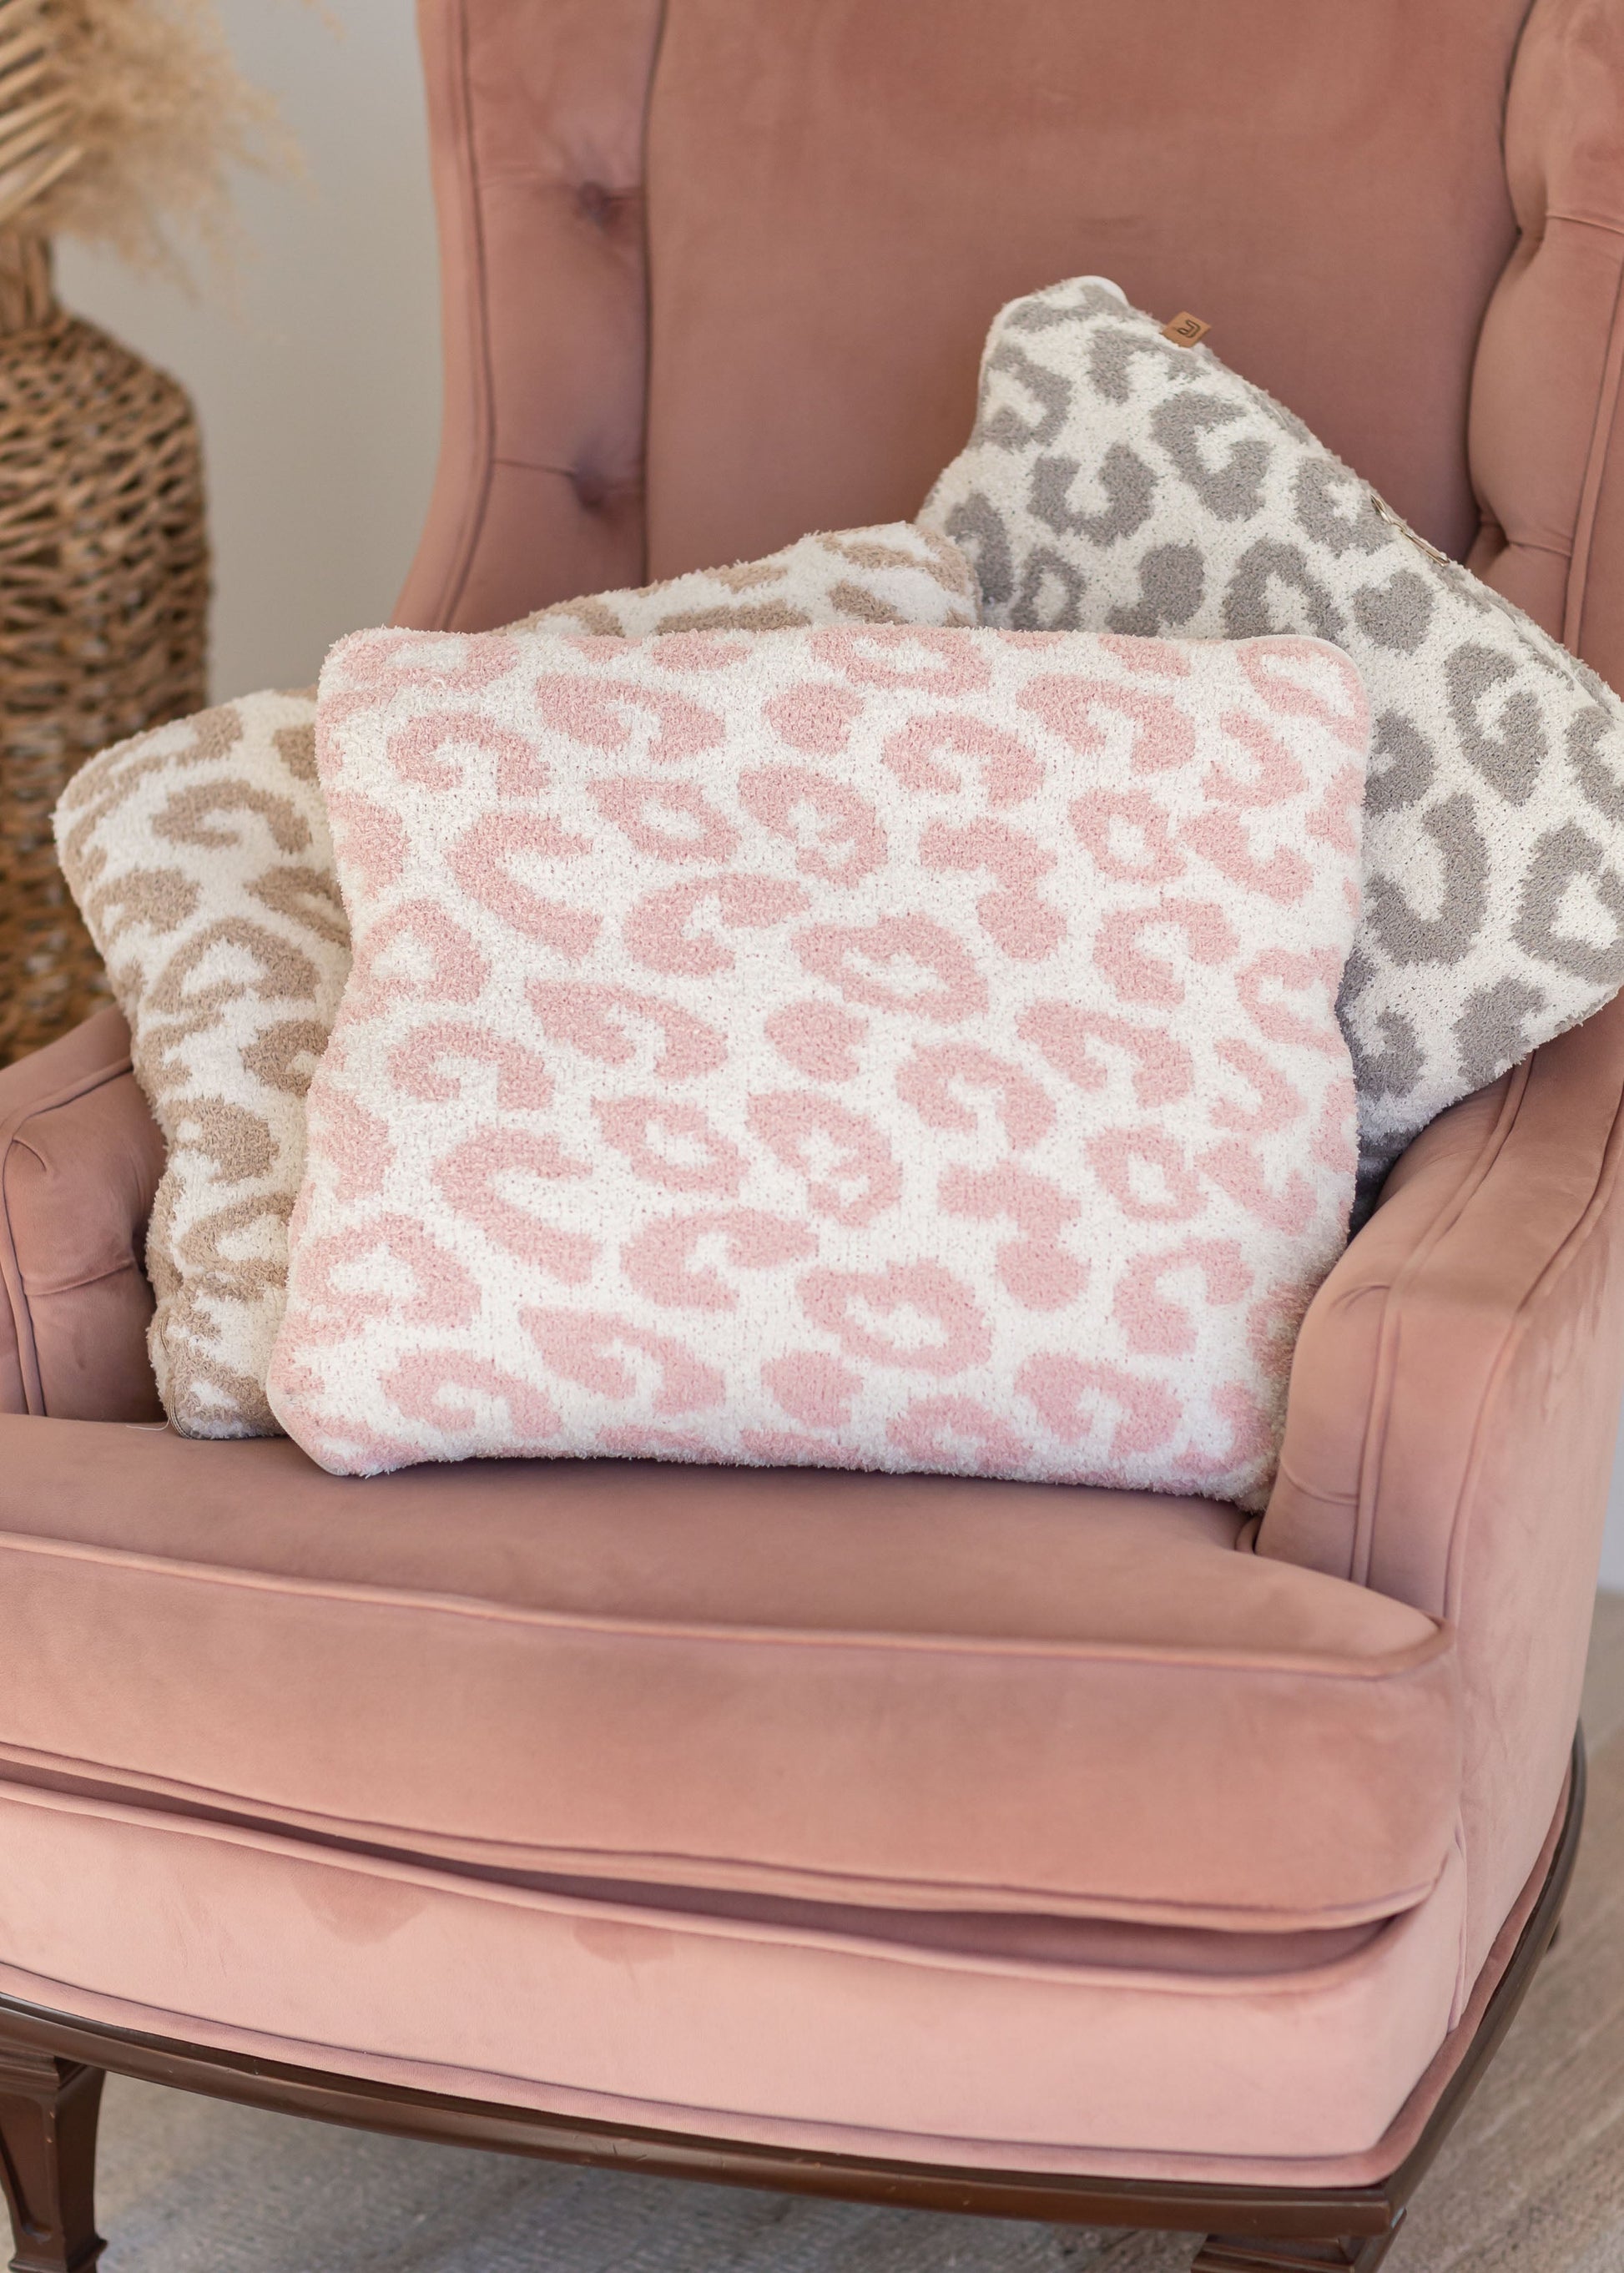 Leopard Print Throw Blanket + Pillow Gifts Pink